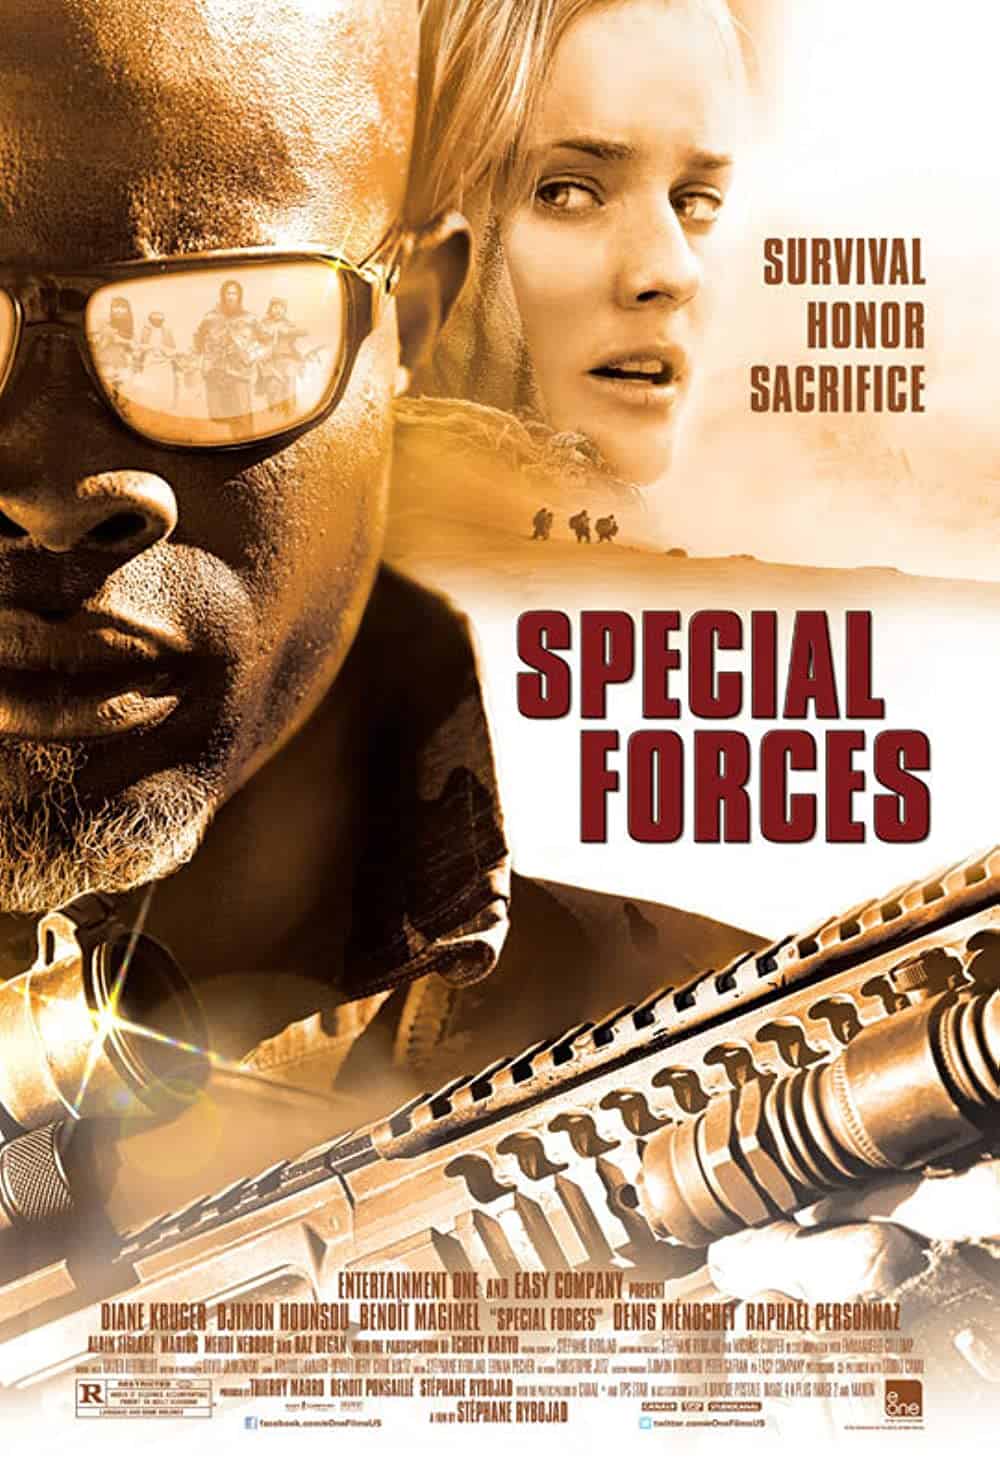 Special Forces (2011) Best Special Forces Movies You Can't Miss